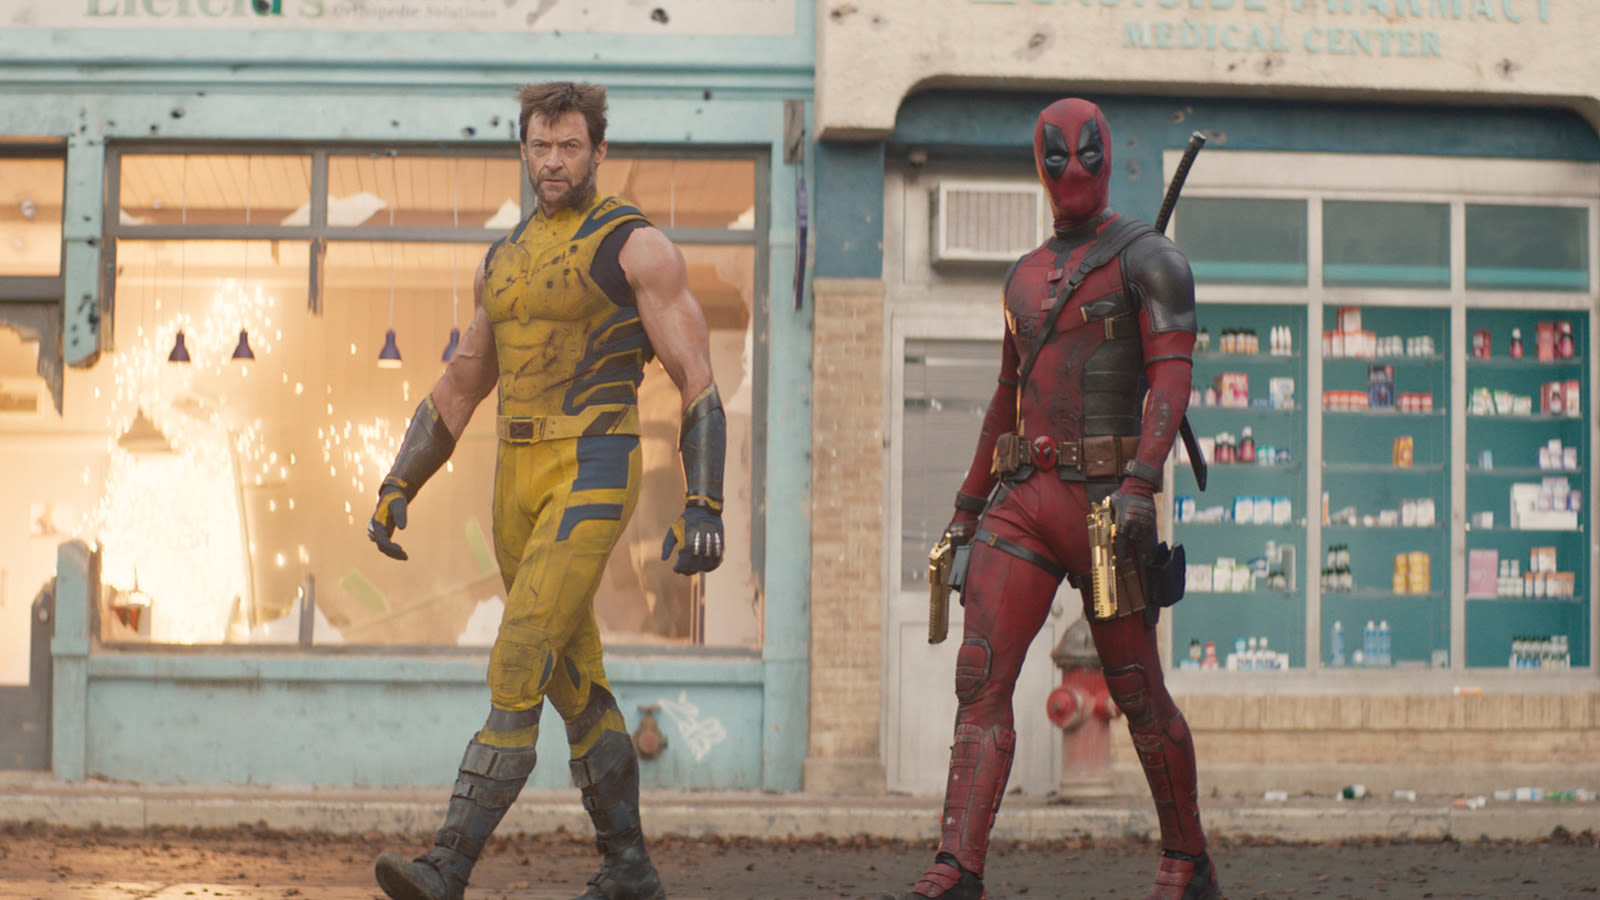 'Deadpool & Wolverine' smashes R-rated record with $205M debut, 8th biggest opening ever